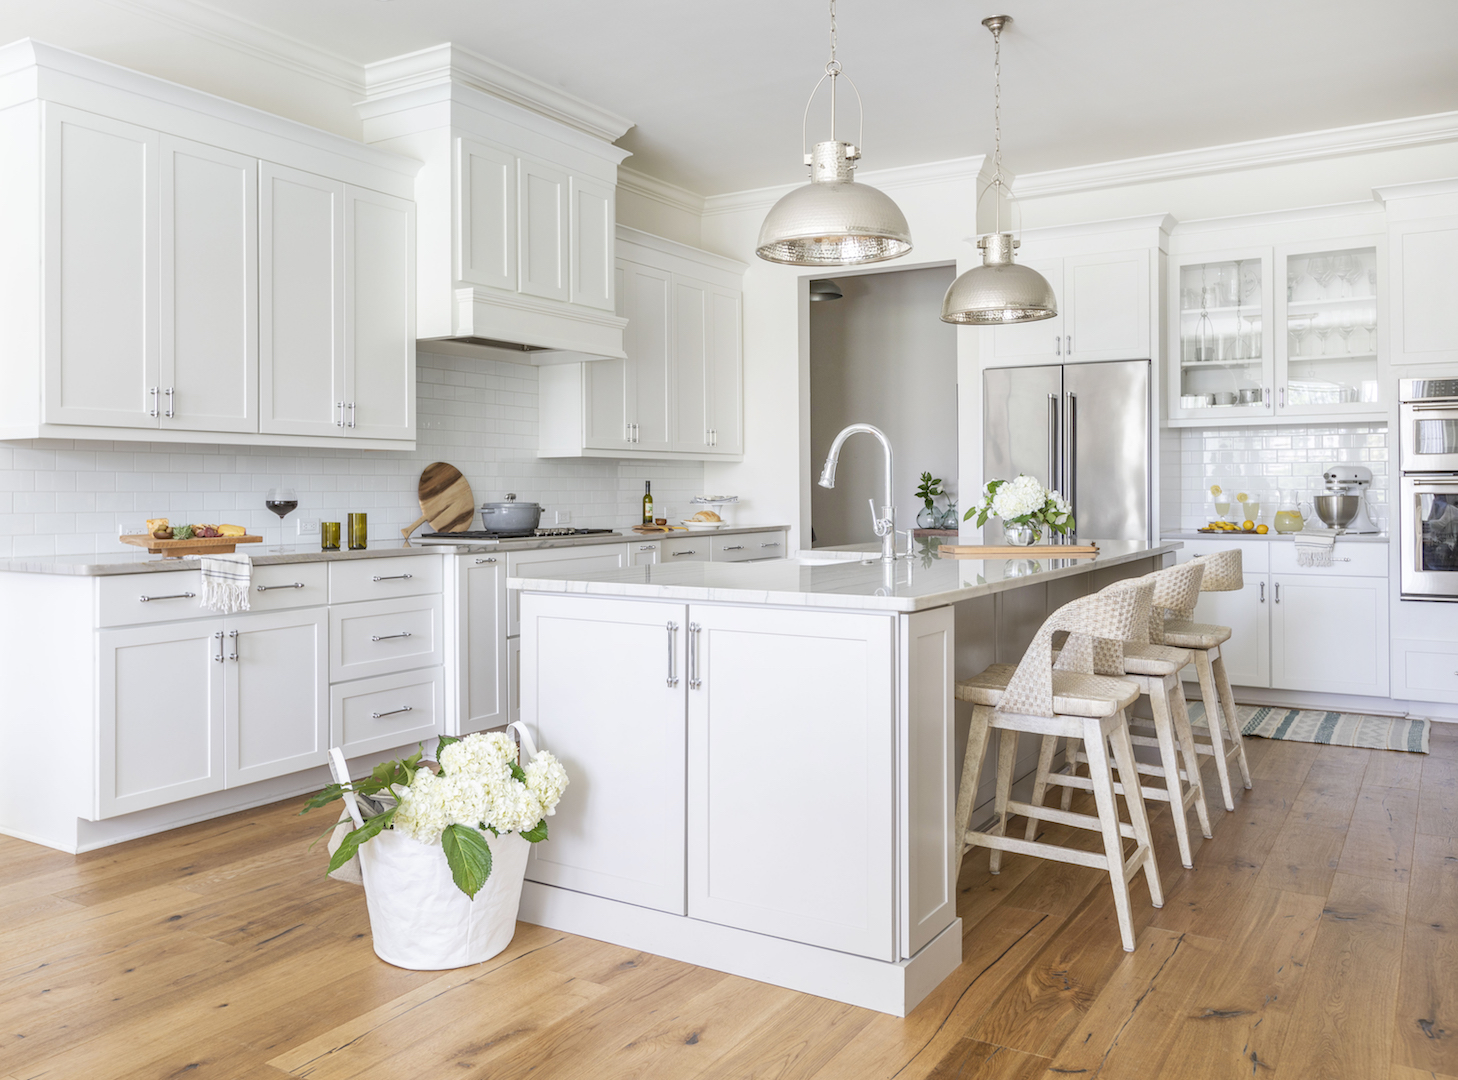 white shaker kitchen with polished nickel plumbing and hardware